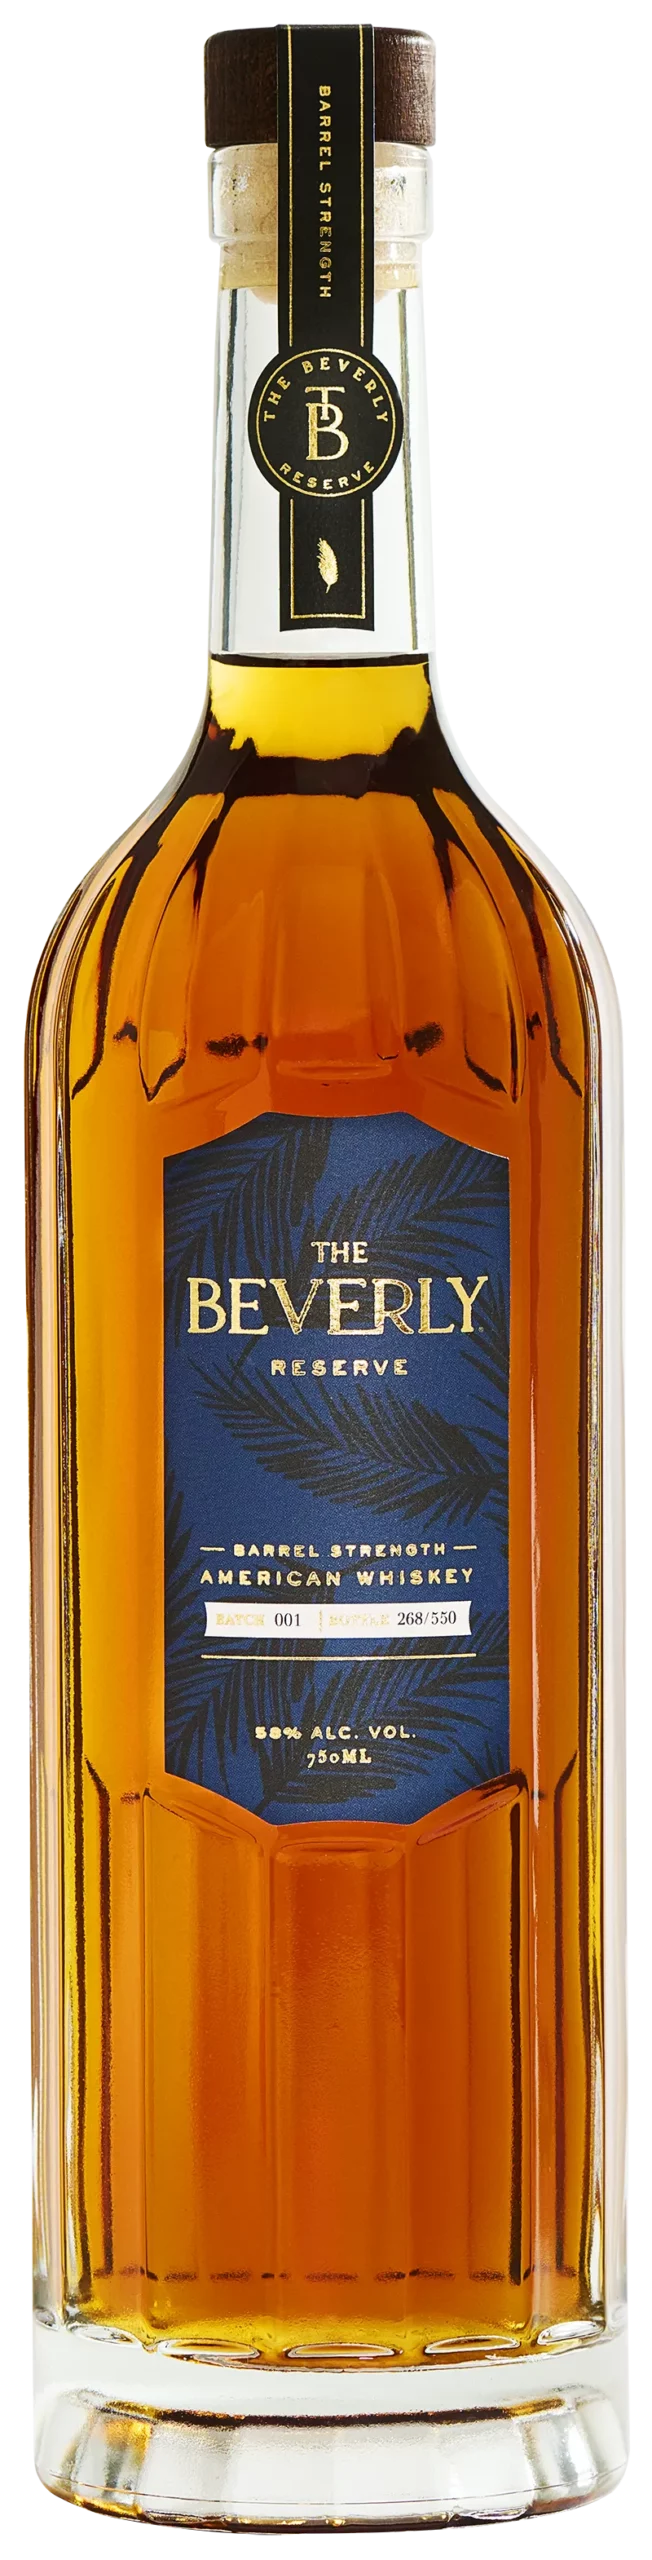 The Beverly Reserve